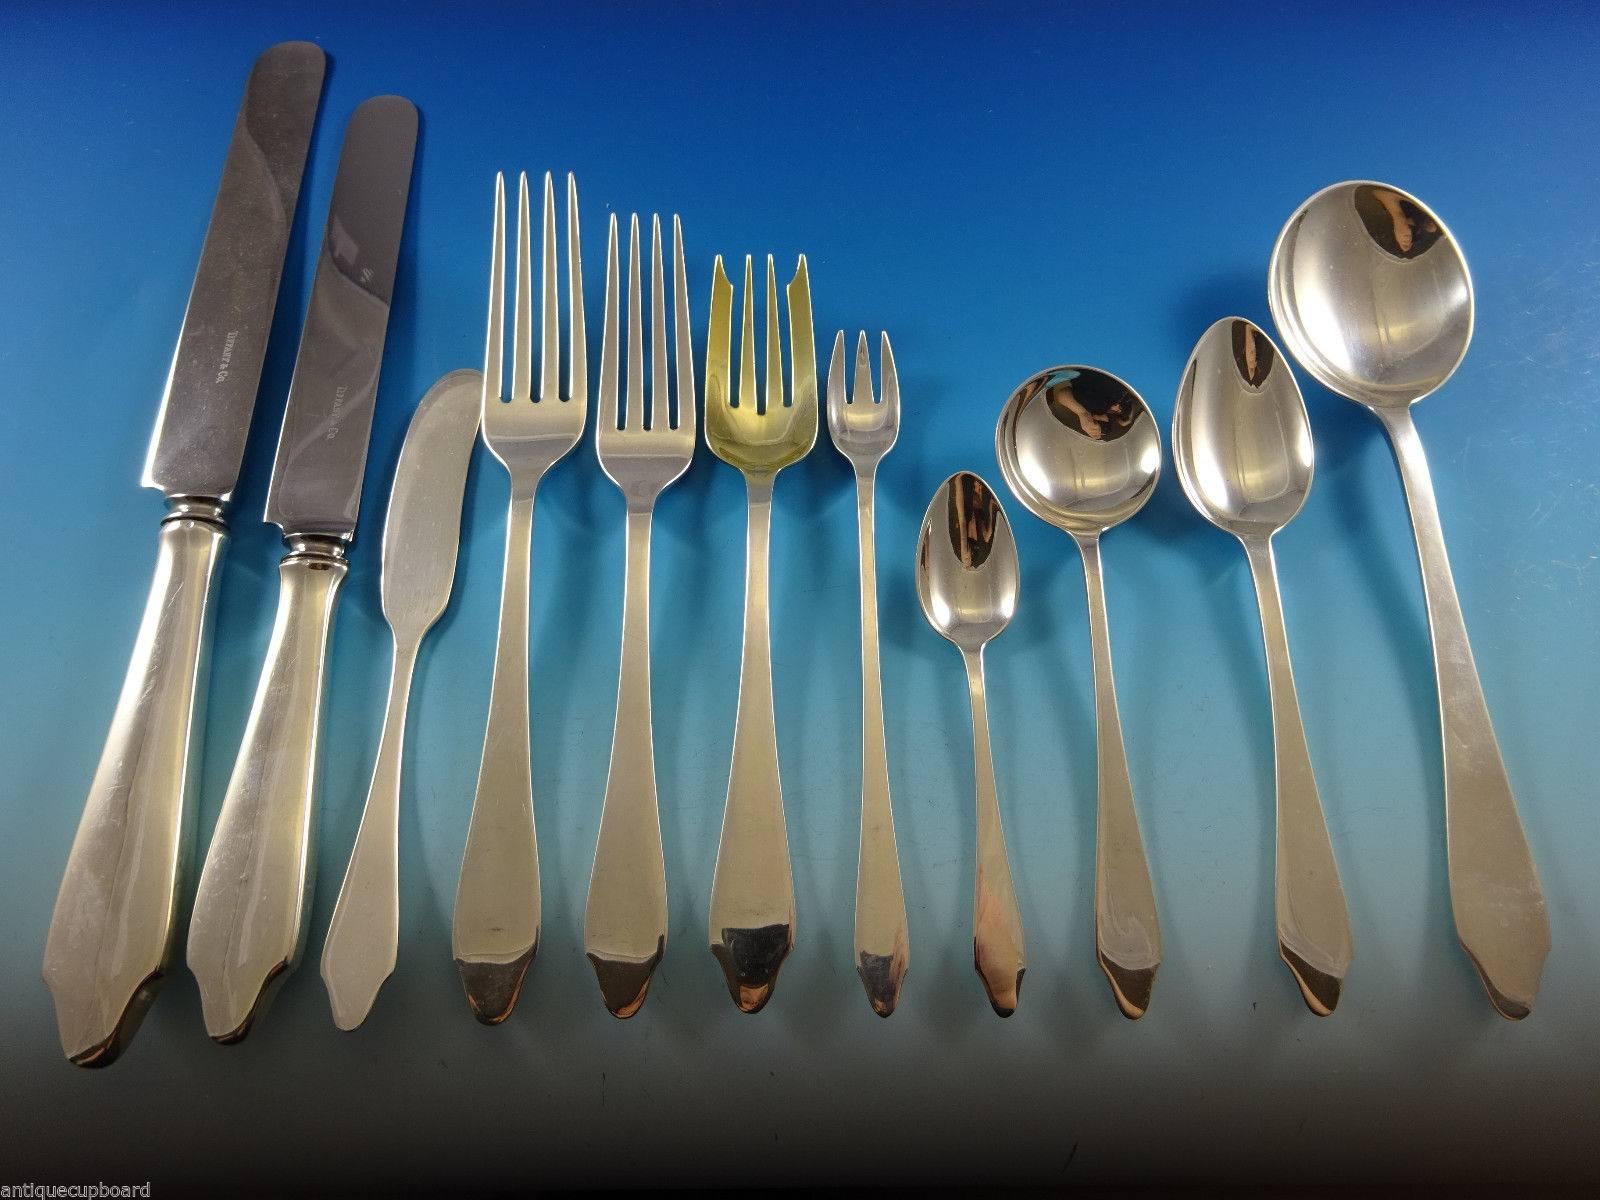 This pattern has a fabulous, clean & unadorned design. This set includes:

•12 DINNER SIZE KNIVES, 10 1/4